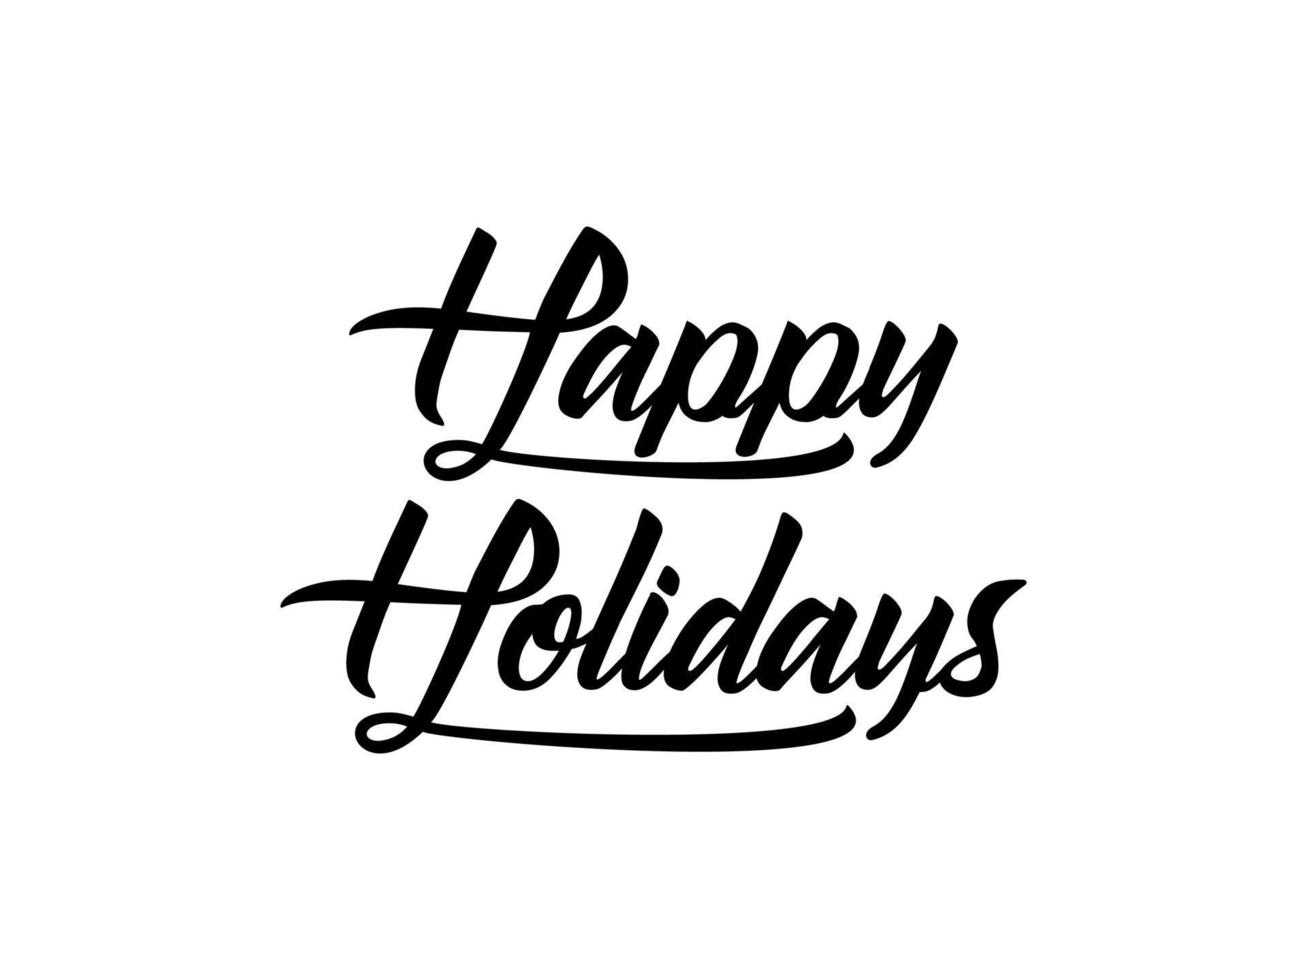 Happy Holidays text lettering calligraphy with Simple Line Arrow isolated on white background. Greeting Card Vector Illustration.